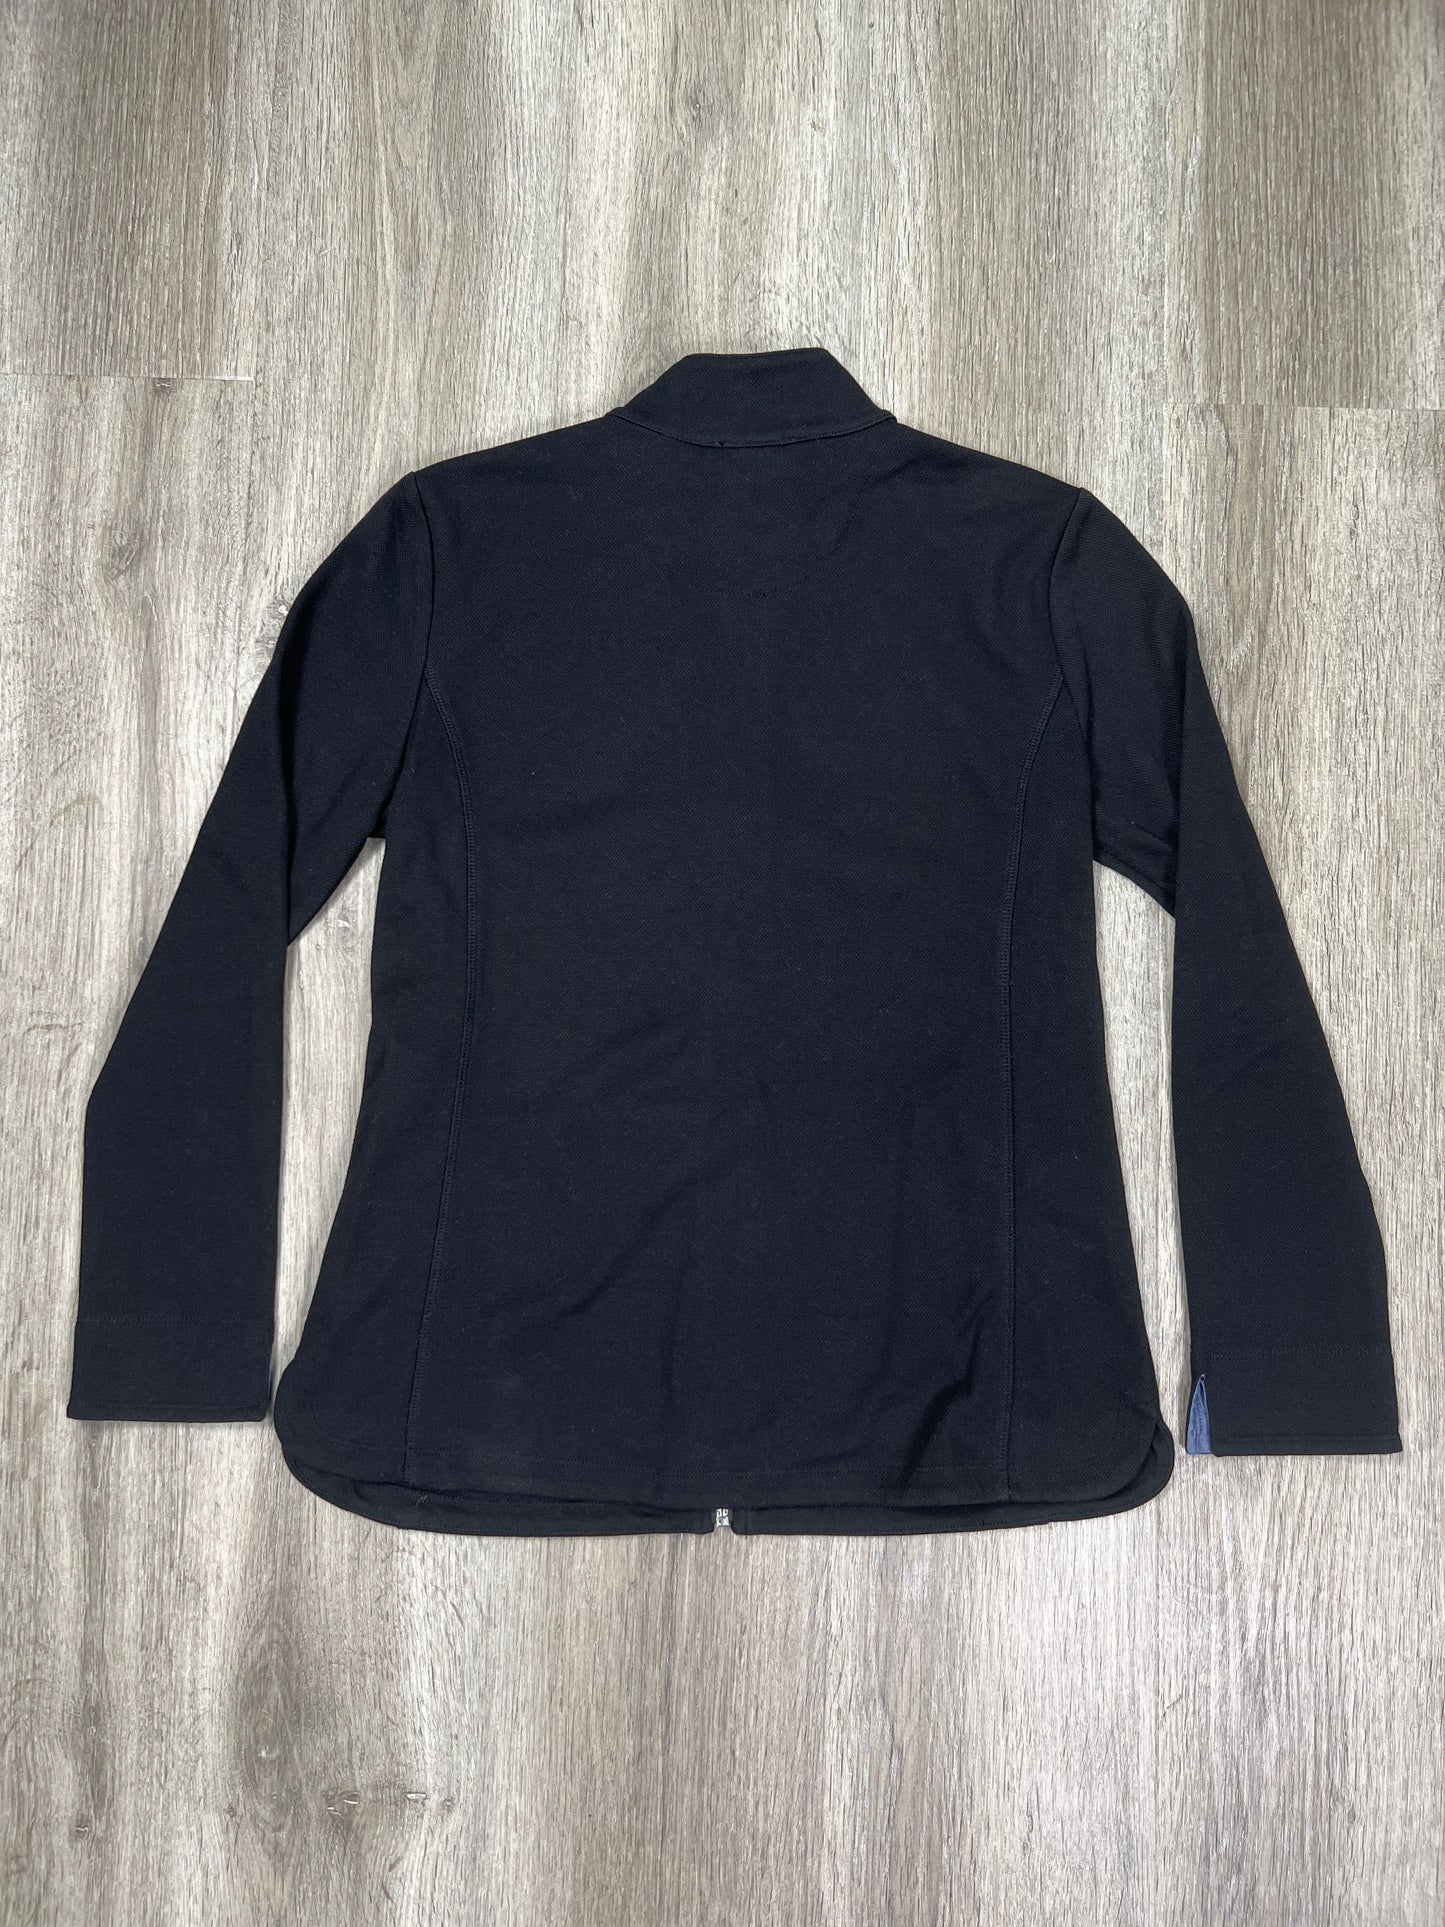 Jacket Other By Talbots  Size: S